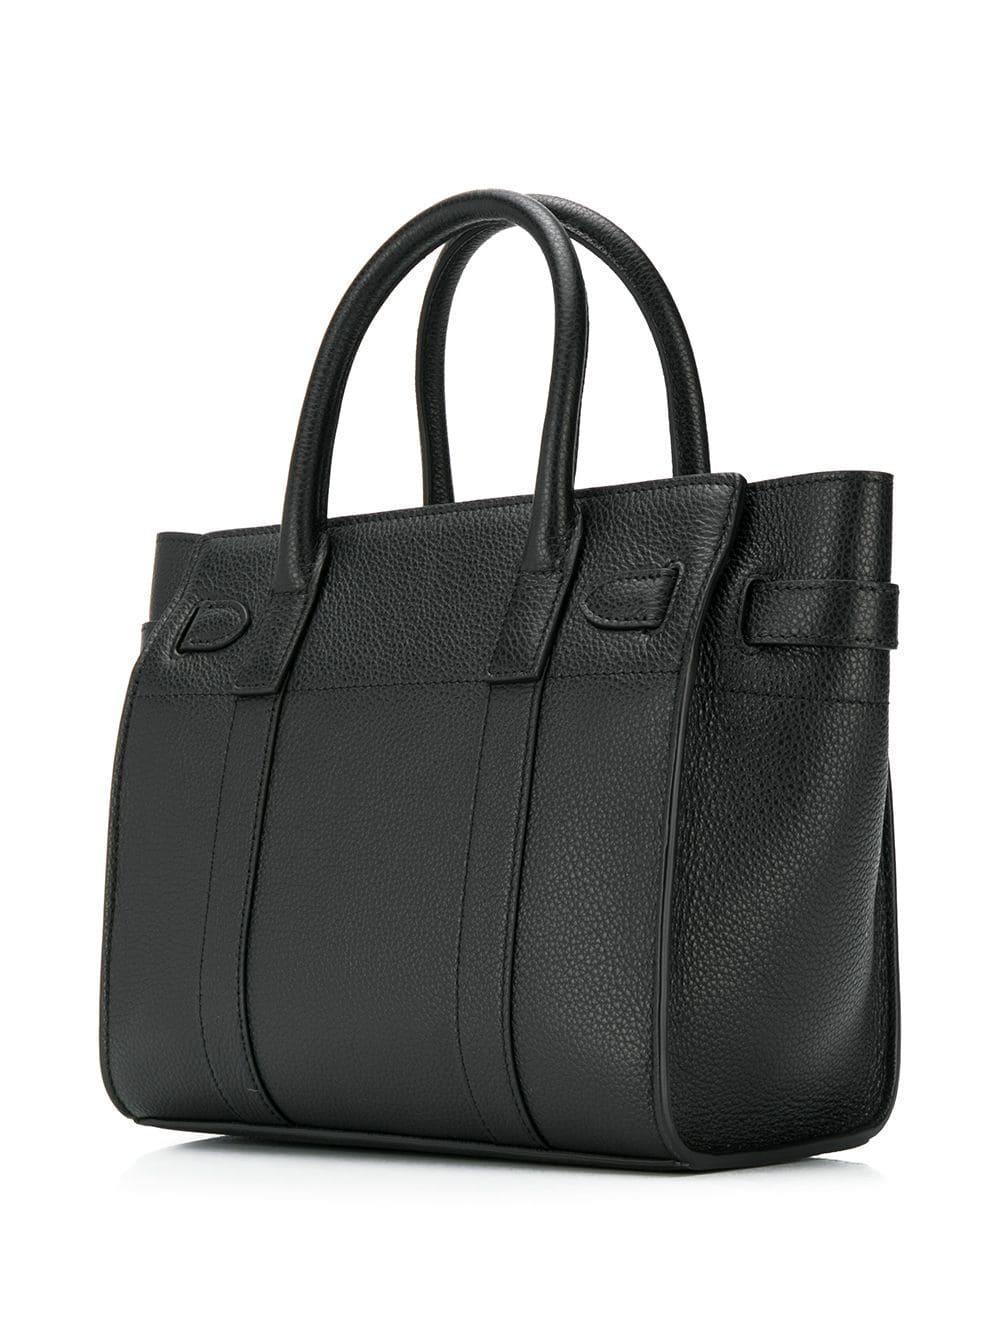 Mulberry Mini Zipped Bayswater Tote in Black - Lyst